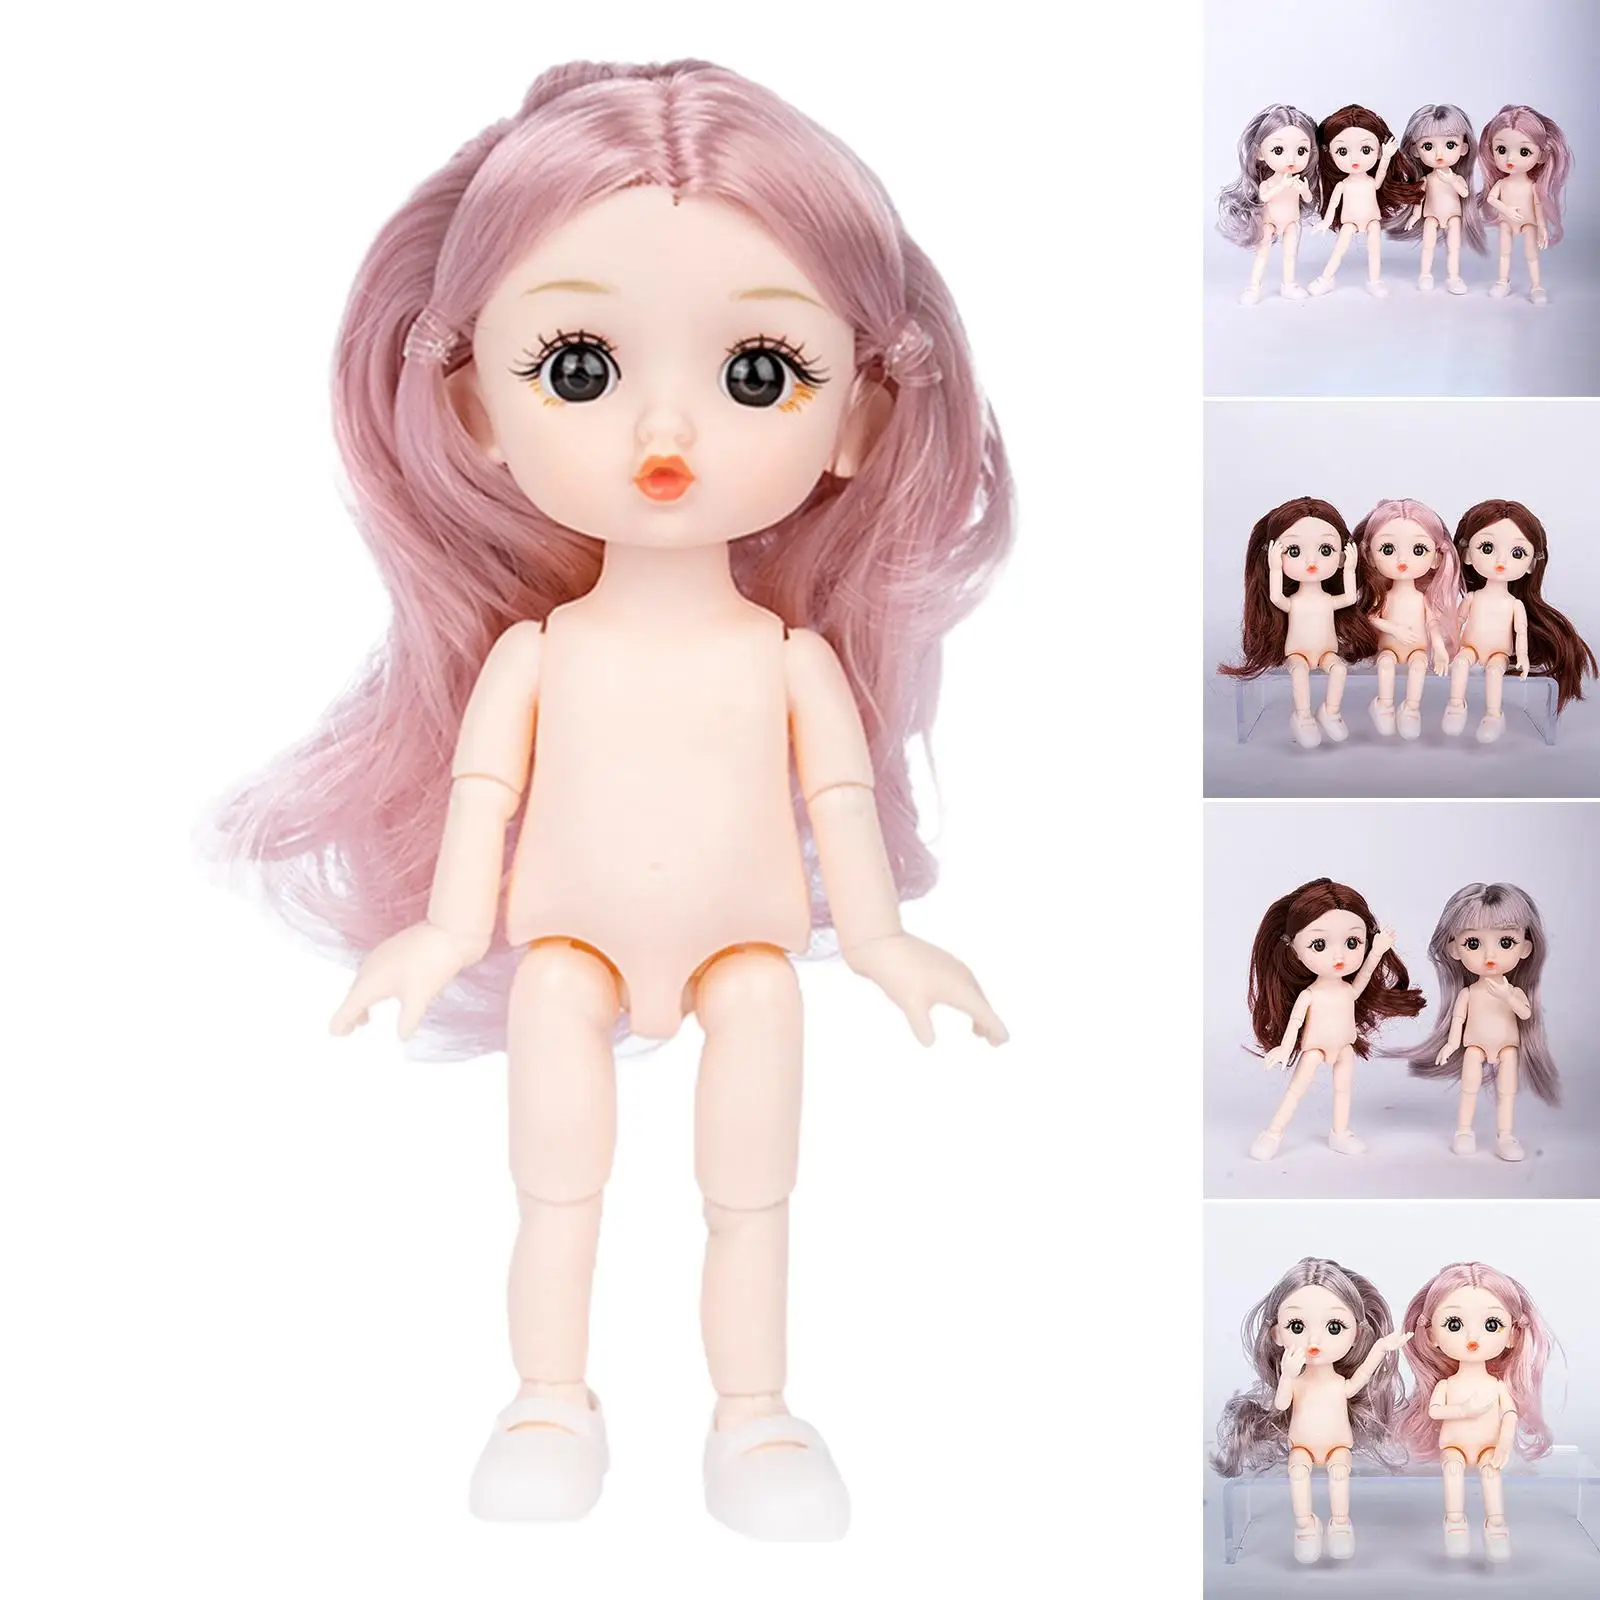 Fashion Fashion Doll Moveable Joints DIY Dolls Toy Big Eyes and Princess Doll Smooth Hair 3D Eyes for Pretend Play Gifts Toy